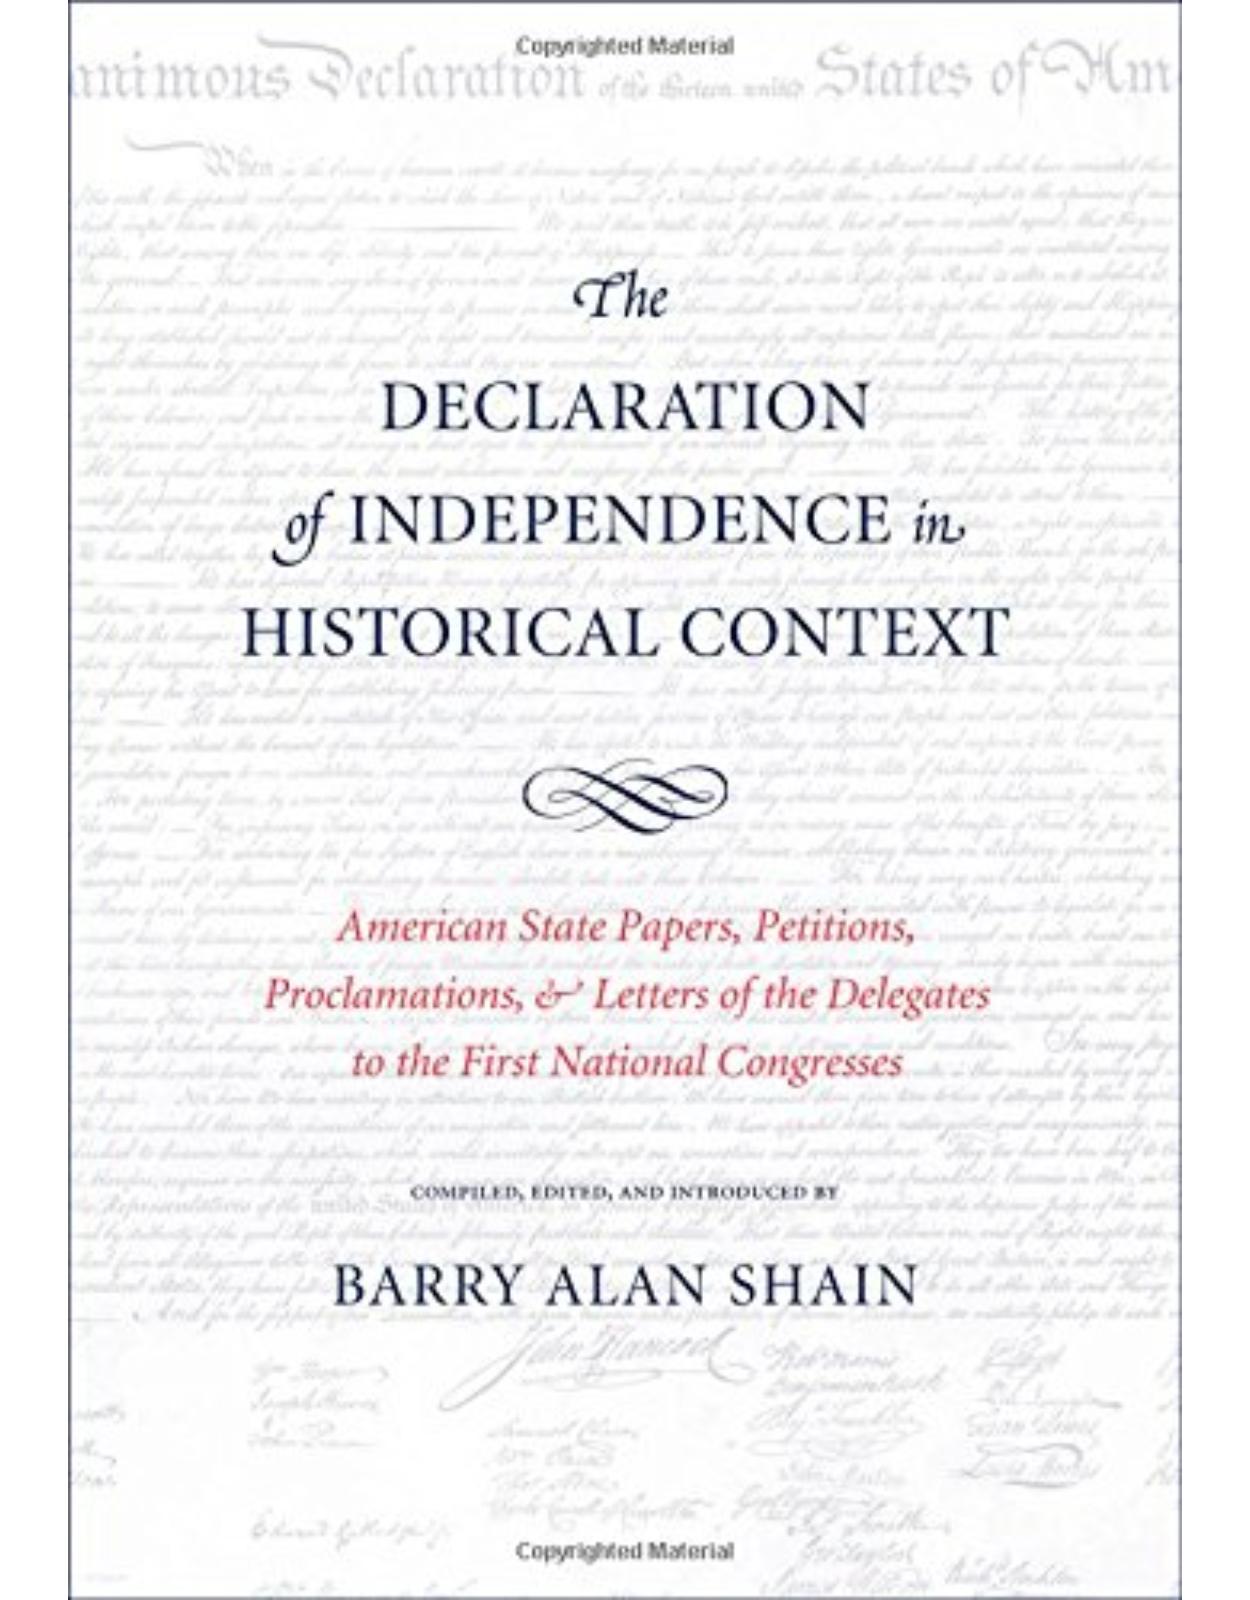 Declaration of Independence in Historical Context. American State Papers, Petitions, Proclamations, and Letters of the Delegates to the First National Congresses